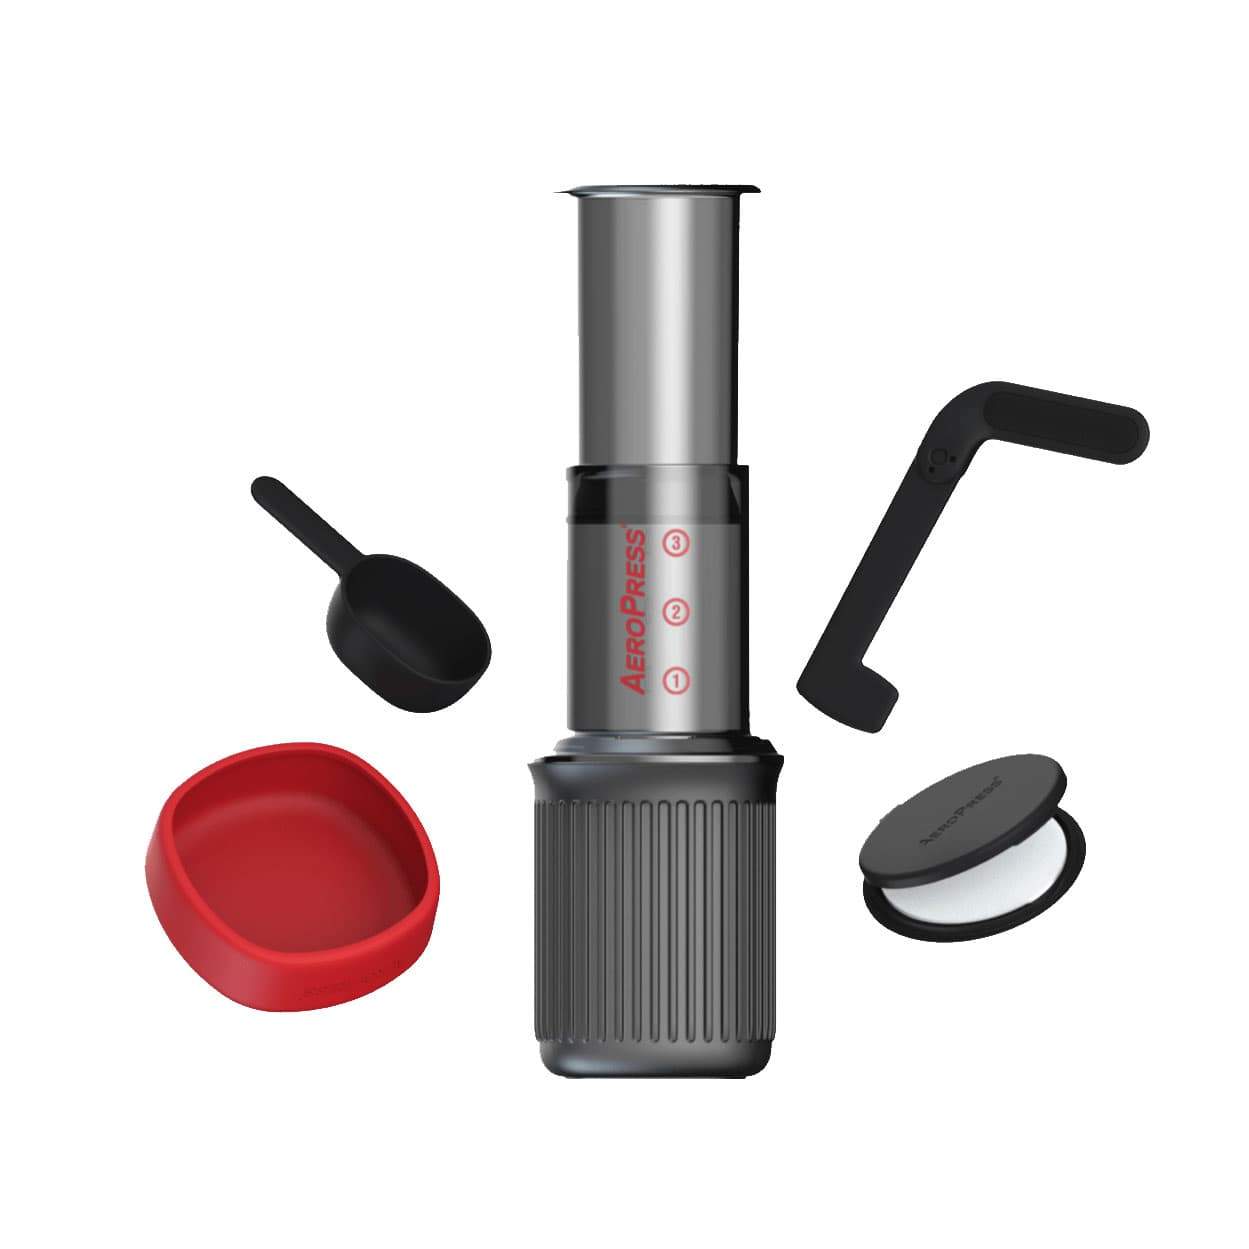 Aeropress Go Portable Coffee Press, 1-3 Cups (350 Filters Included)